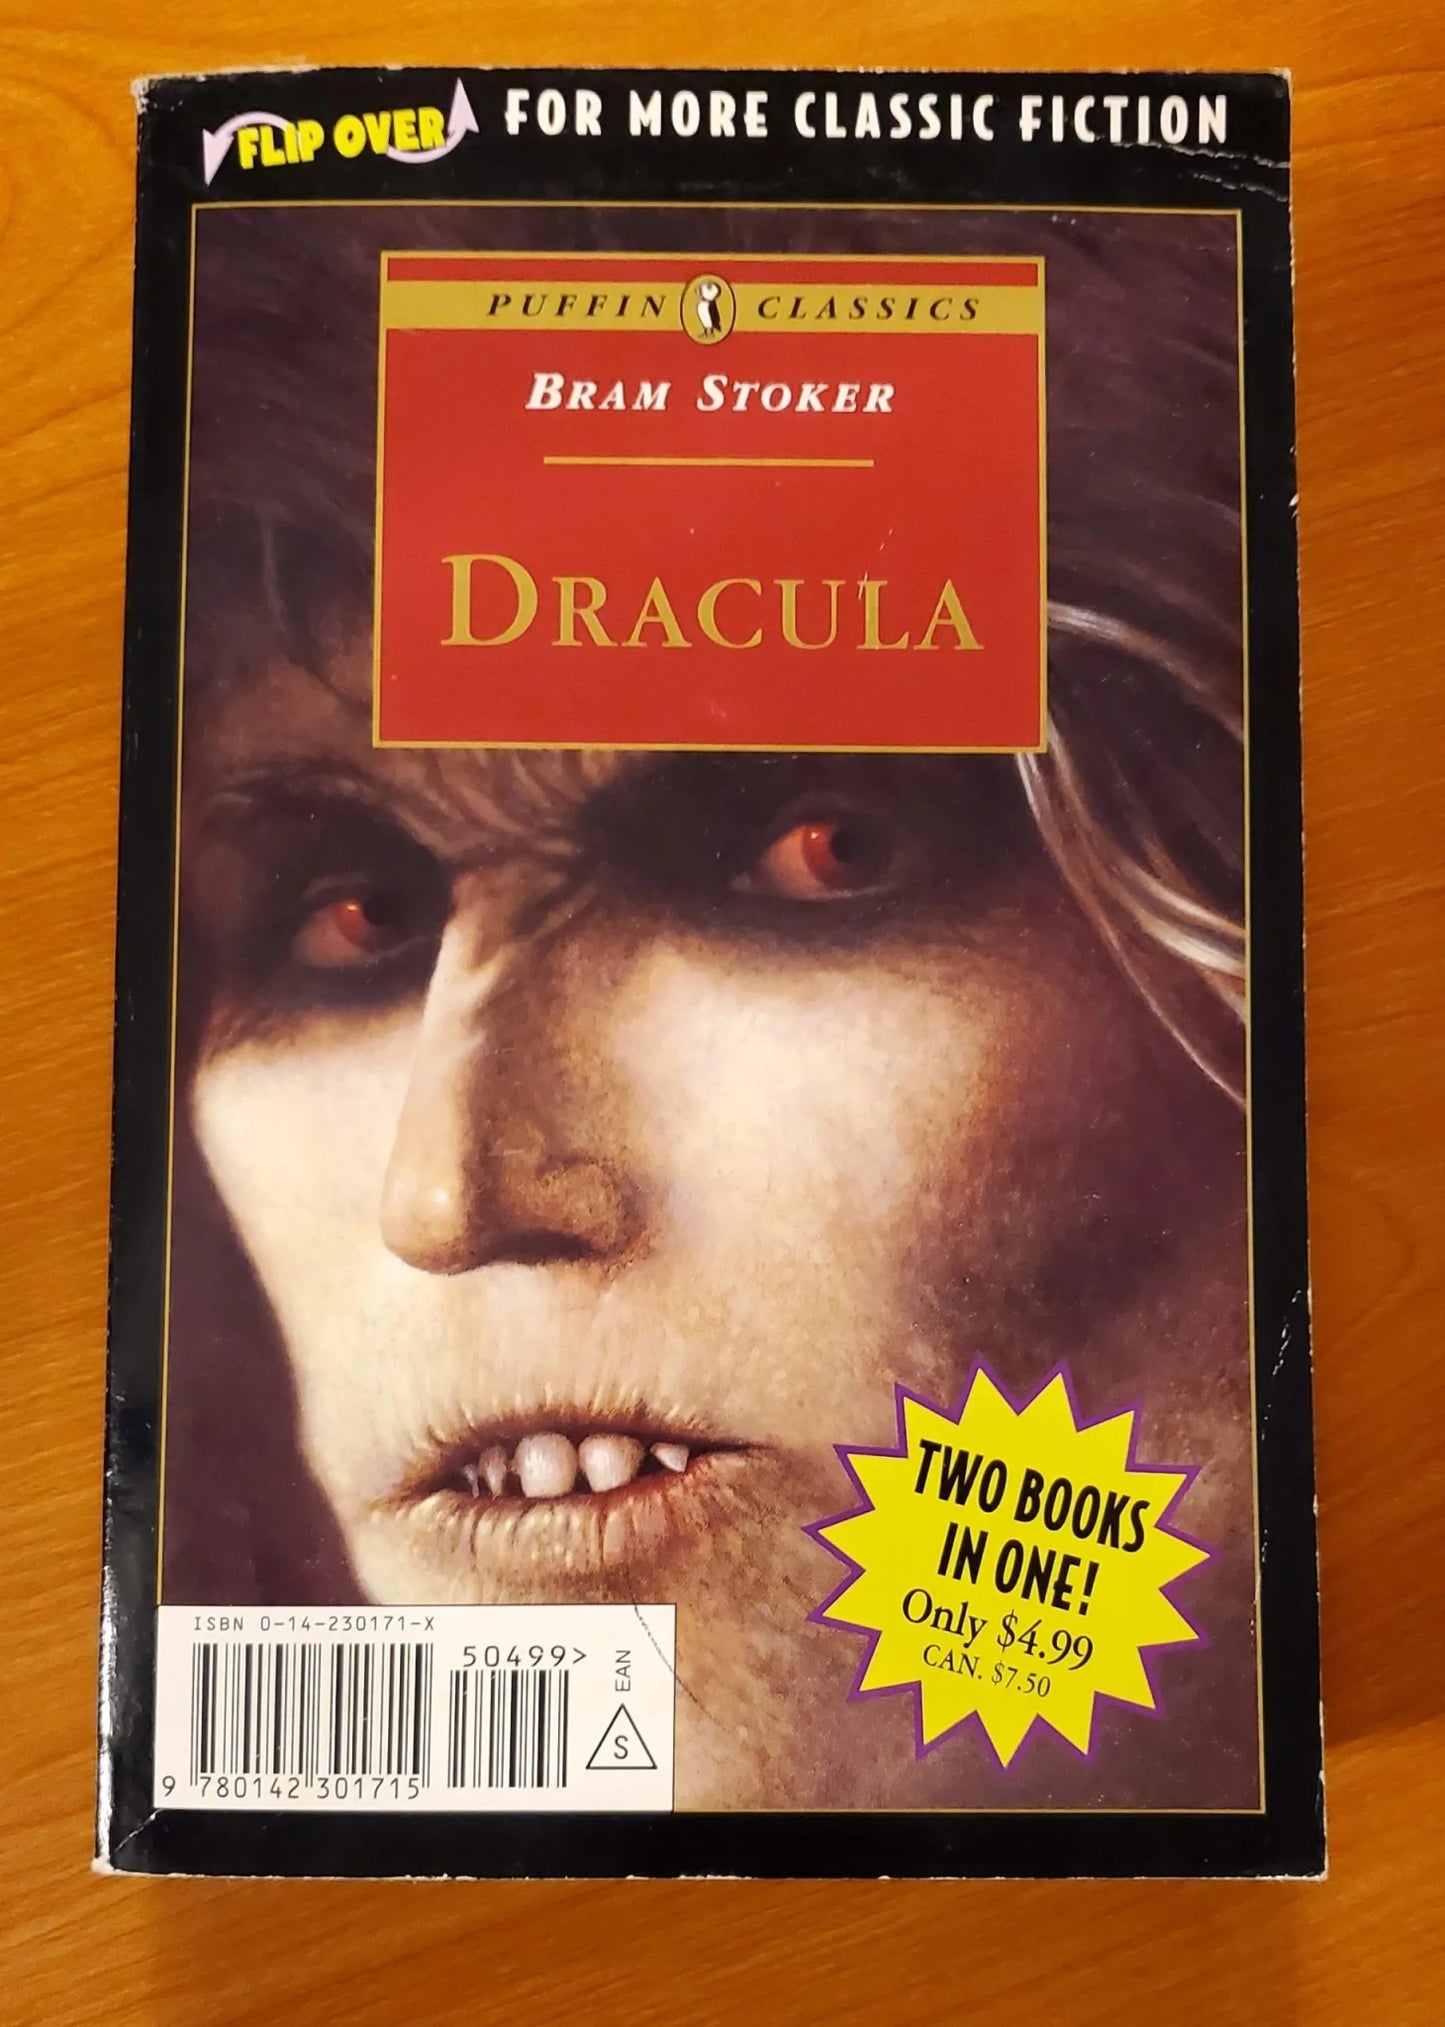 Puffin Books - Frankenstein Dracula Dual Book - Mary Shelley Bram Stoker - Paperback Book - Steady Bunny Shop